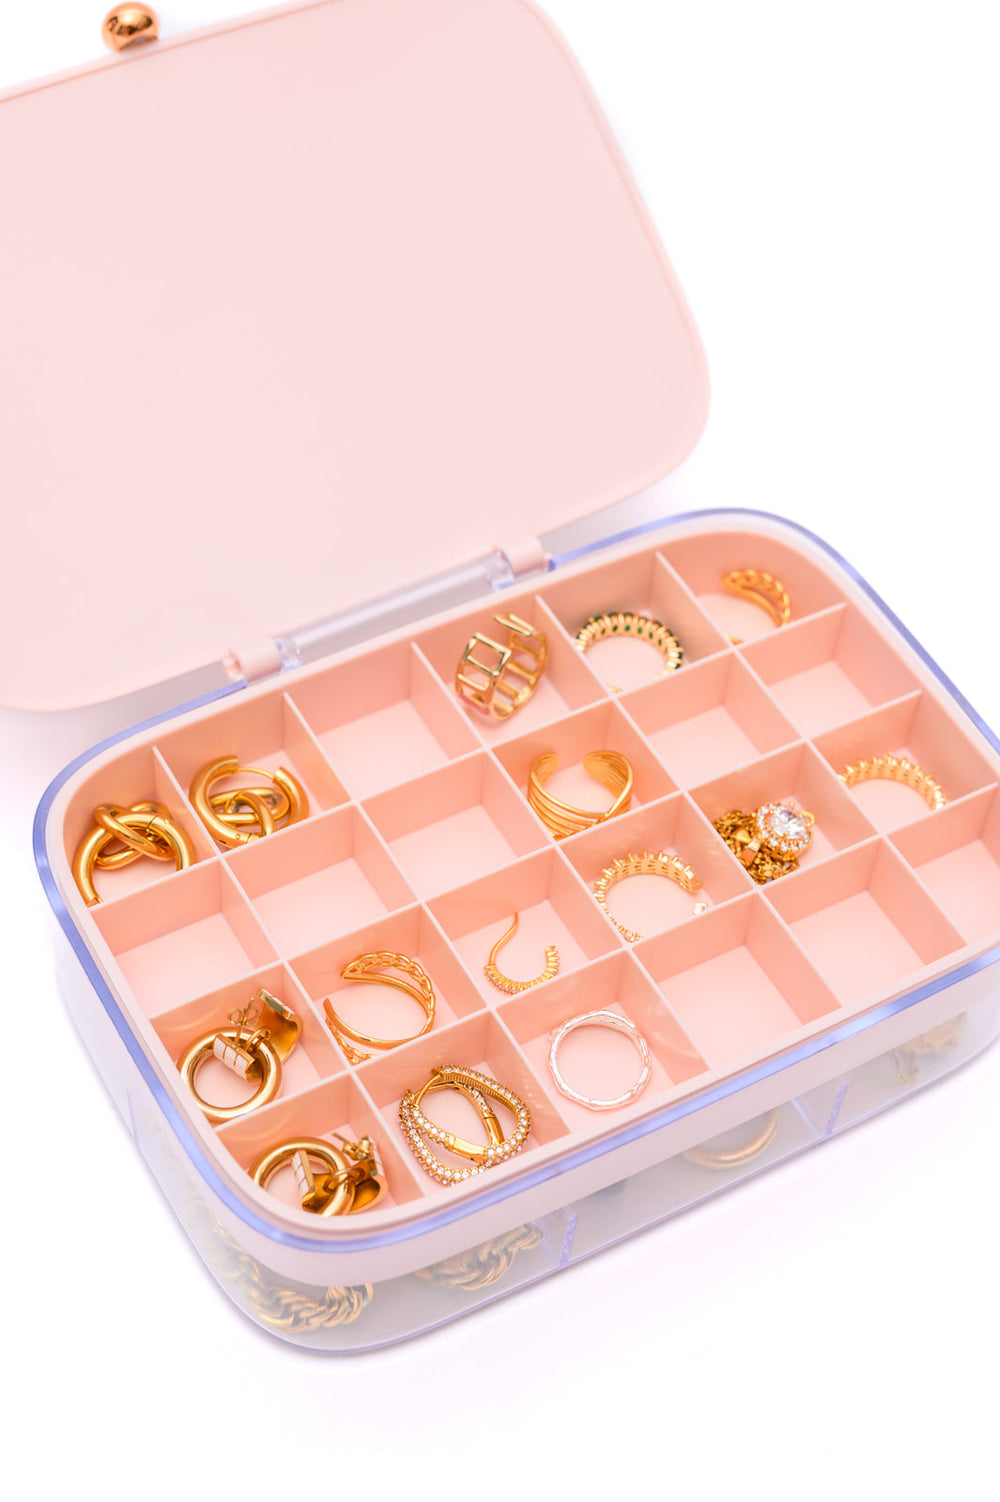 All Sorted Out Jewelry Storage Case in Pink-Ever Joy